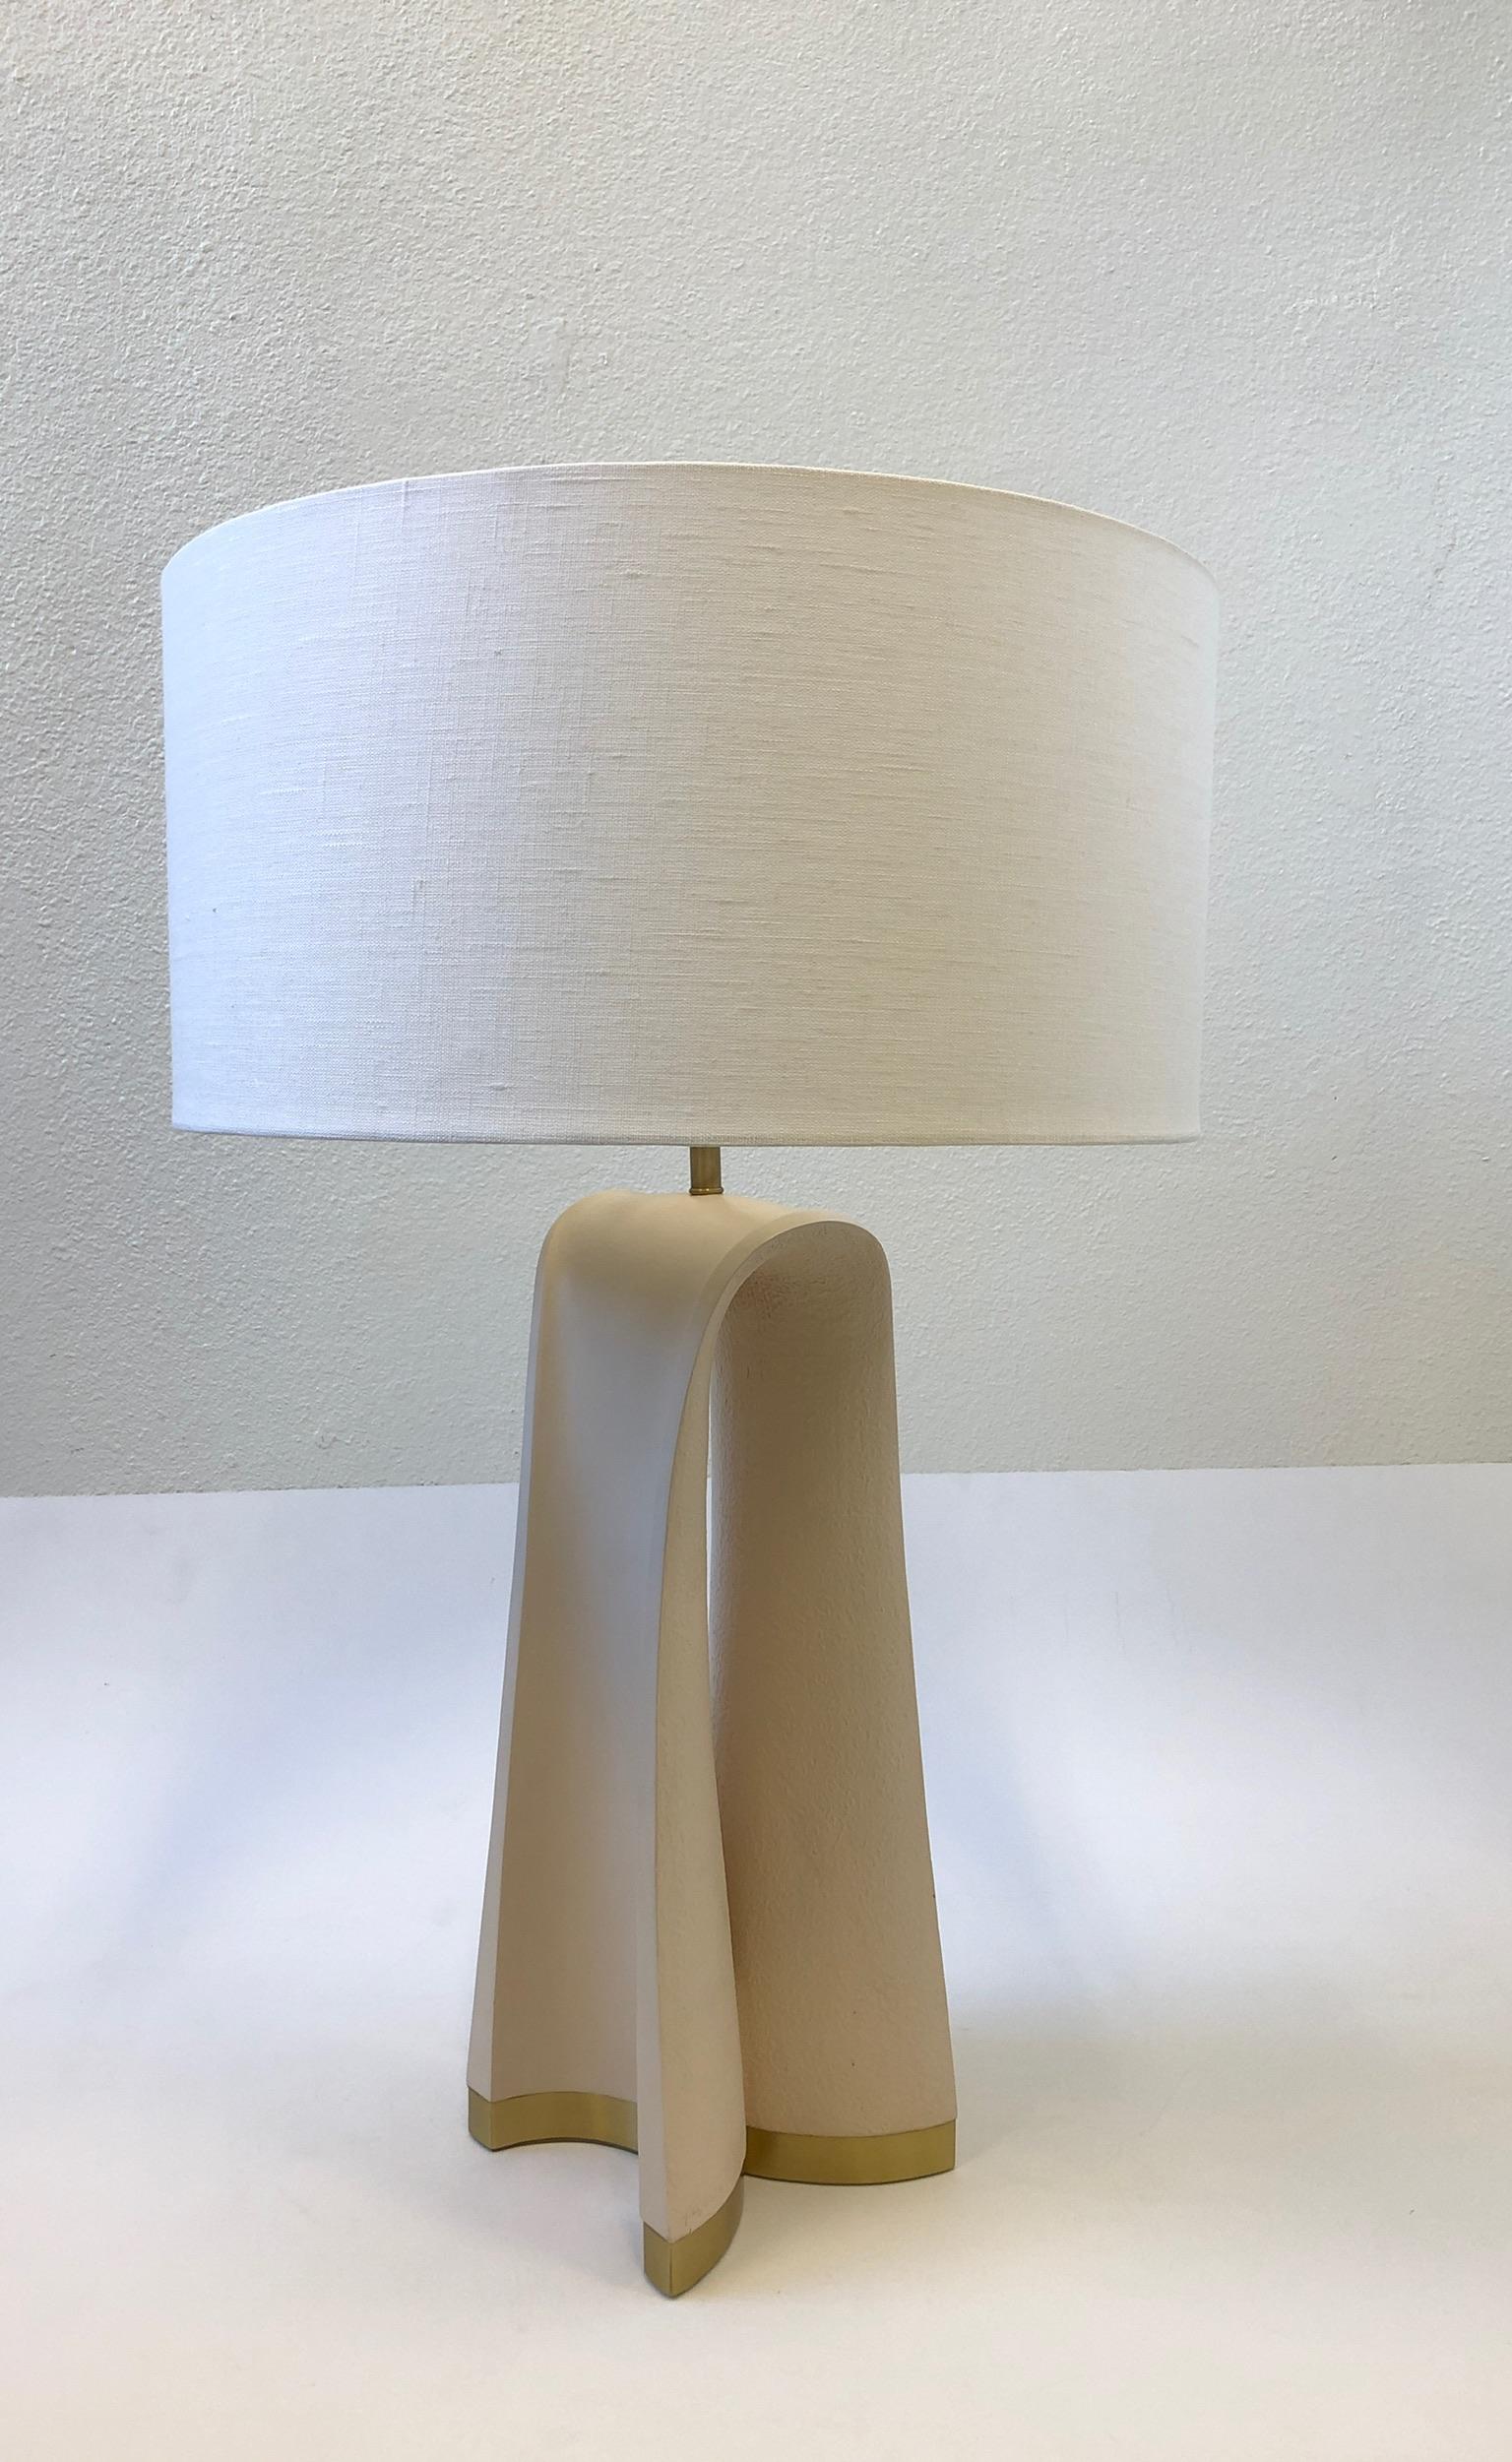 A spectacular 1980s sculpted plaster with brass hardware table lamp by Boyd Lighting. The lamp is signed by artist and retains the Boyd Lighting label (see detail photos). The lamp has a new vanilla linen shade, it has a full range dimmer that takes